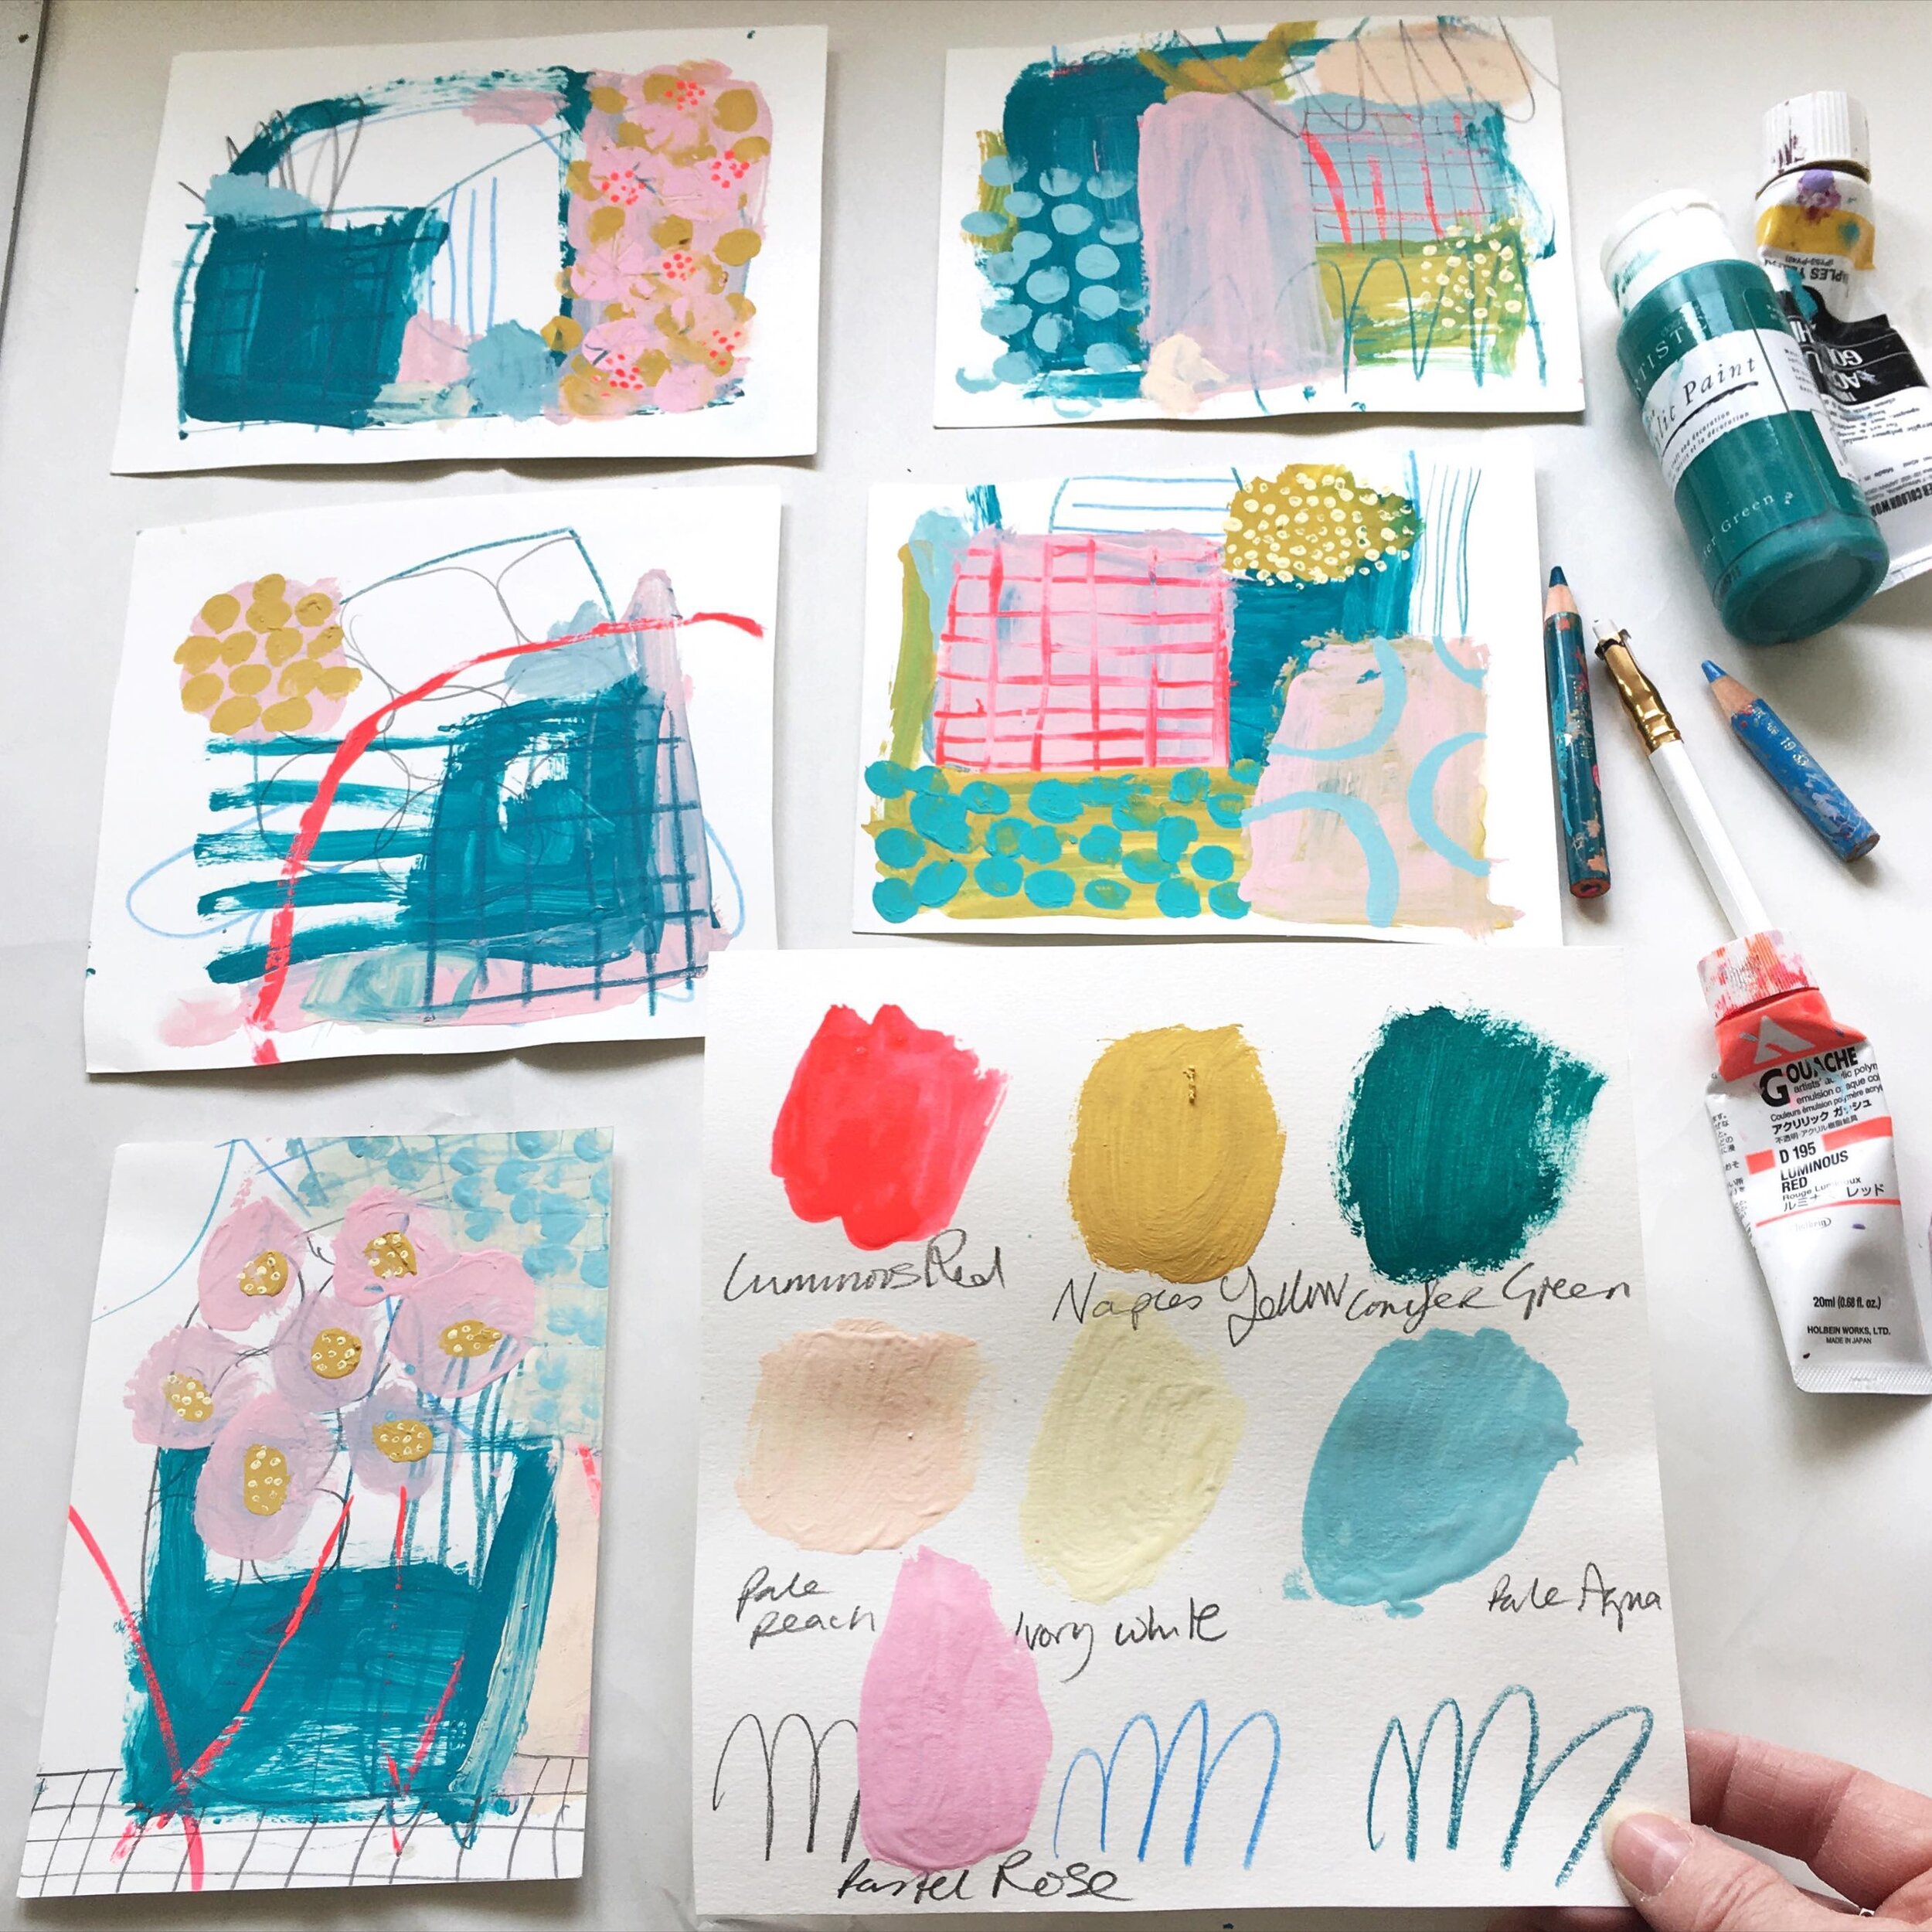 C O L O U R  P A L E T T E ~ inspired by these little paint studies I did a while ago. I love the colour combination 💕 nice. bright, clear and warm tones for Spring. 
.
Always had a soft spot for them.I&rsquo;m looking forward to exploring this colo